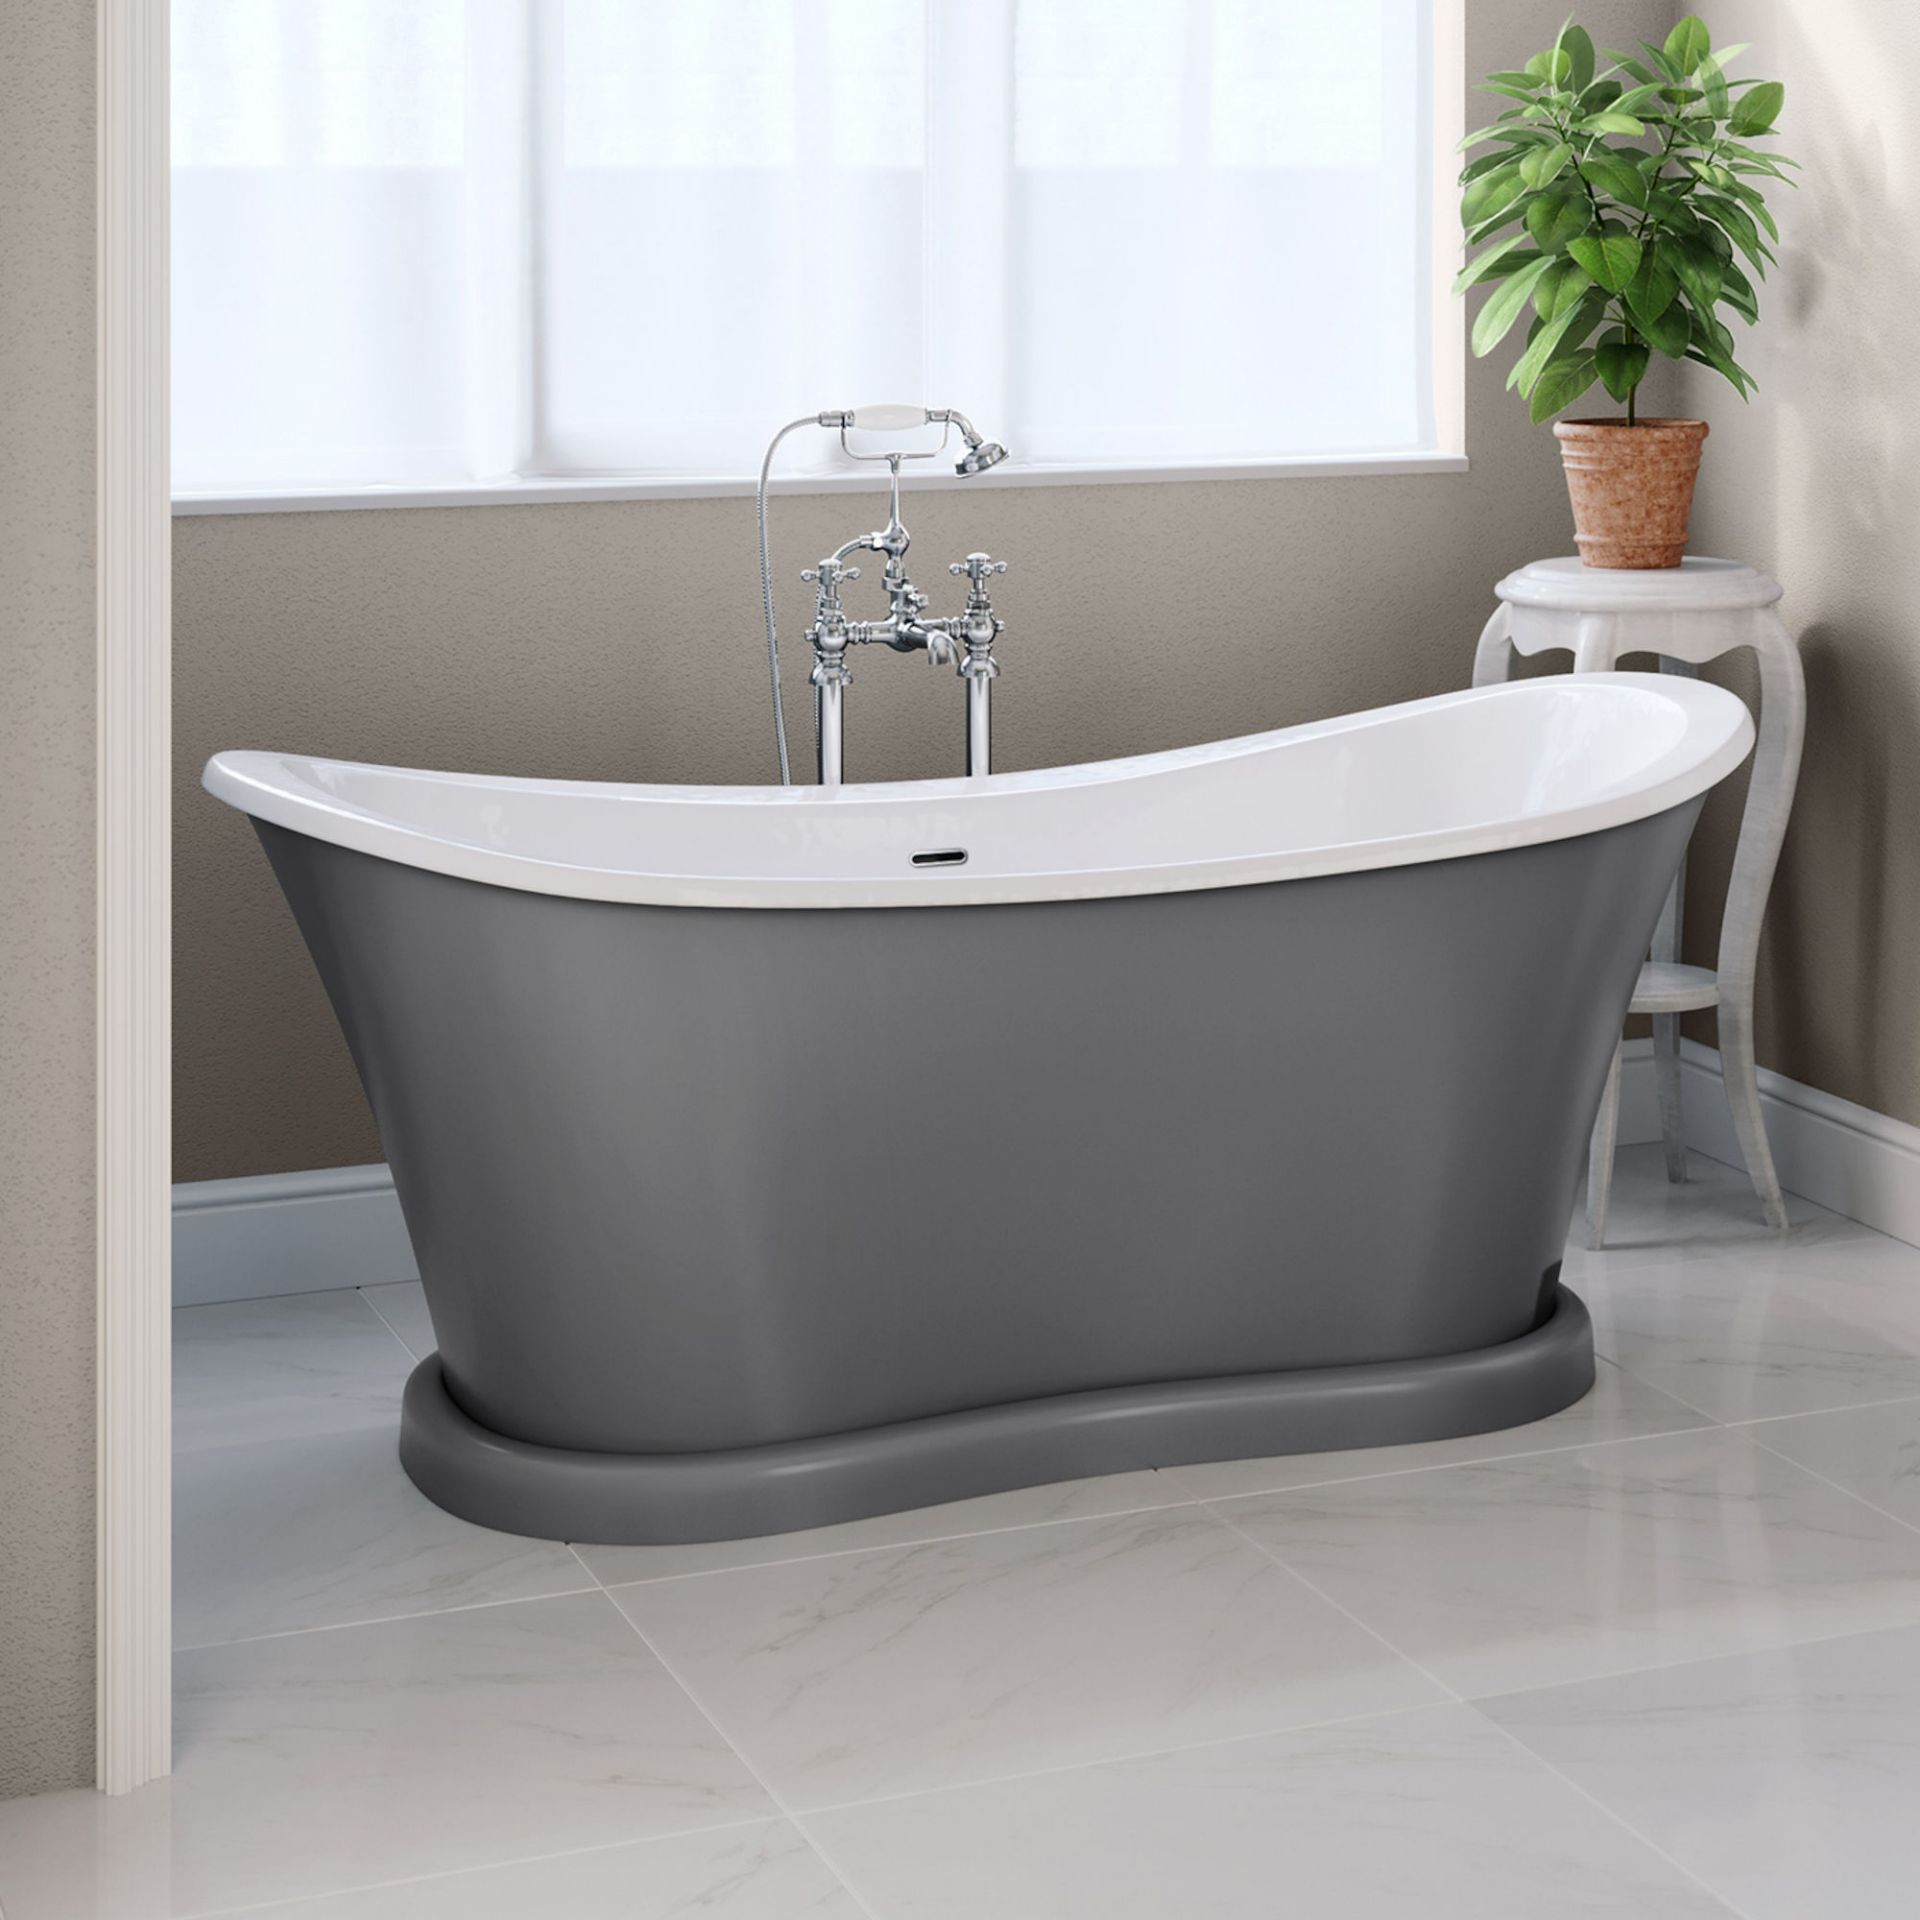 (XS3) 1700mm York Grey Bathtub. Victorian inspired bath Stunning Matte Earl Grey finish Double ended - Image 4 of 6